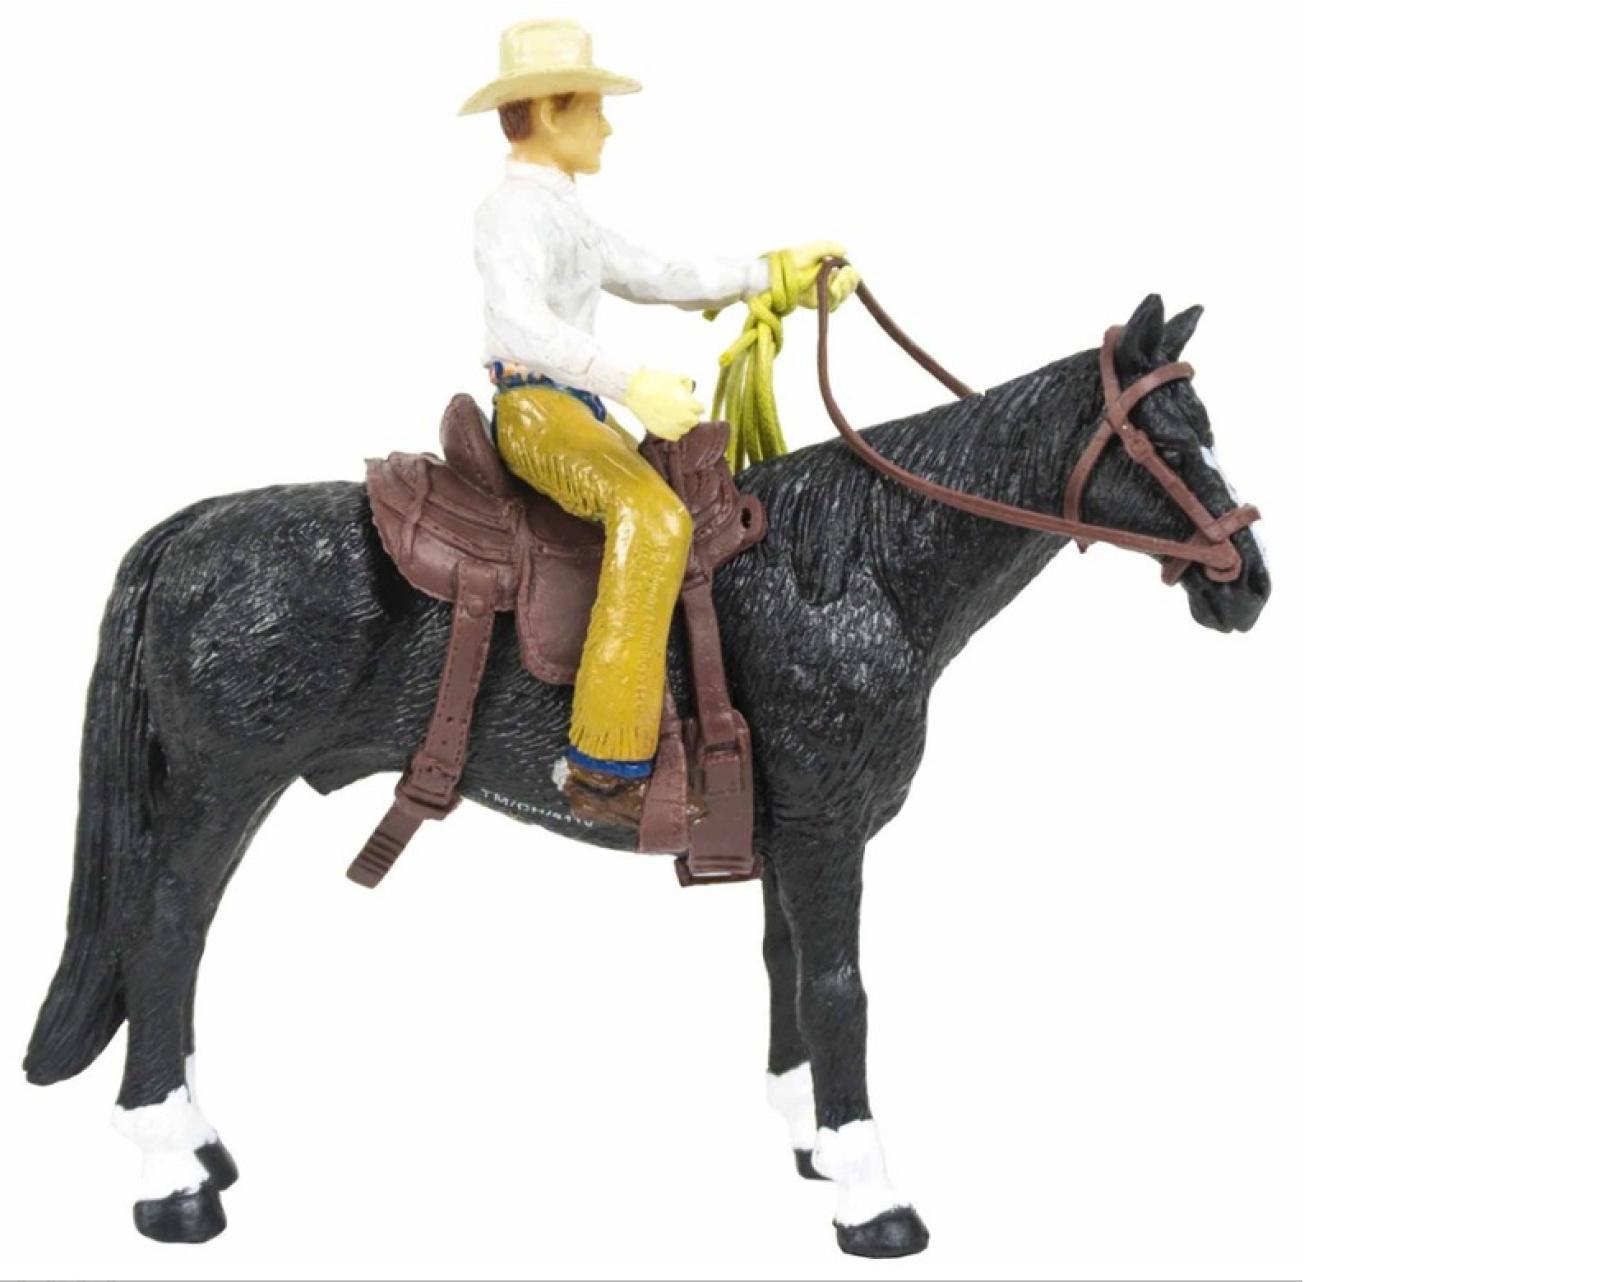 Big Country Farm Toys Cowboy on Horse Right Side